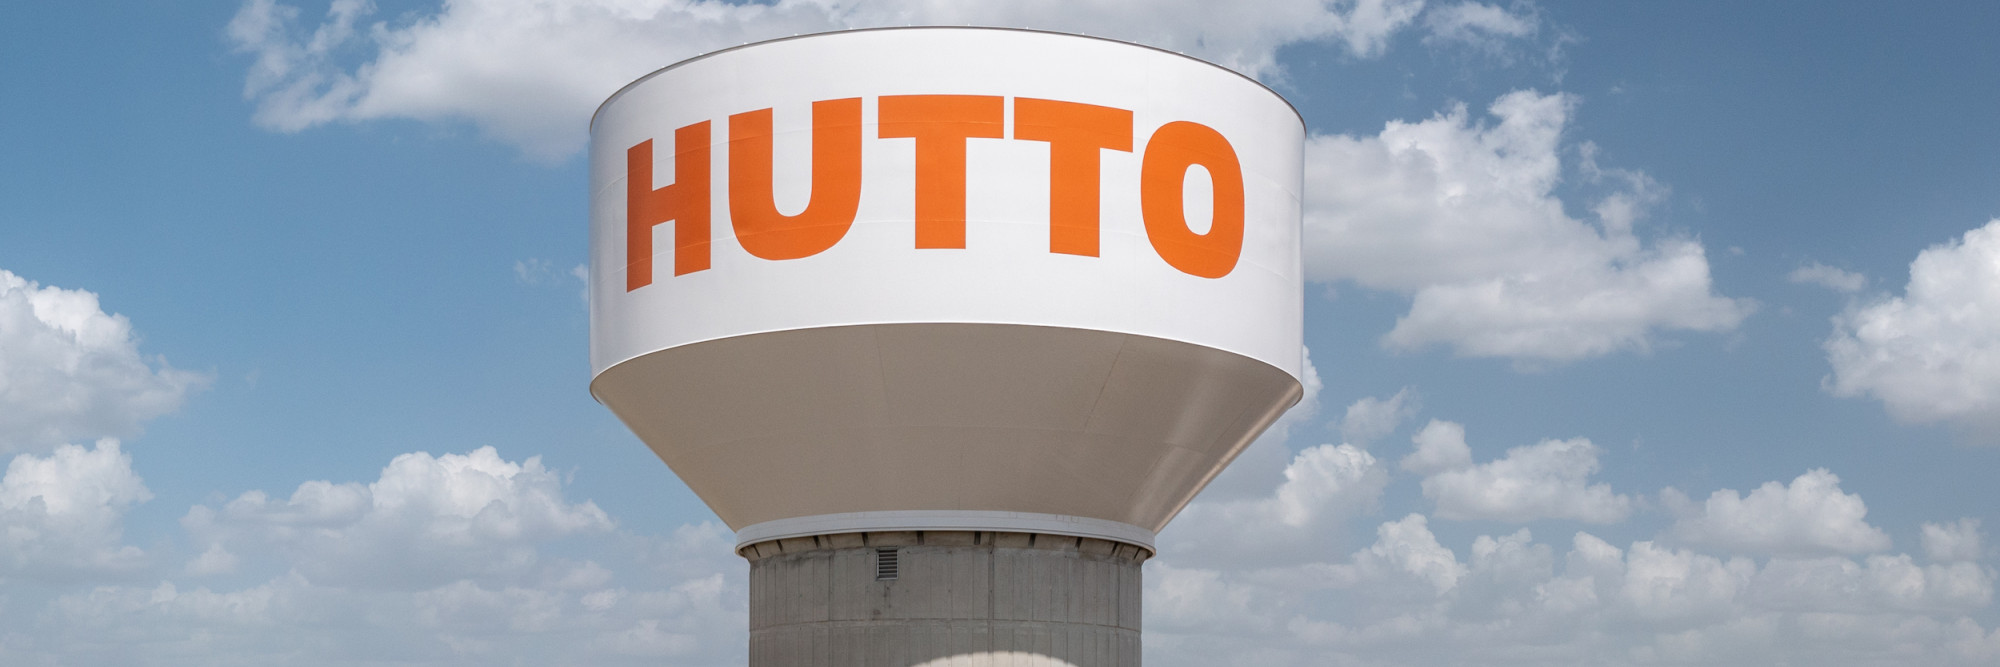 Hutto water tower